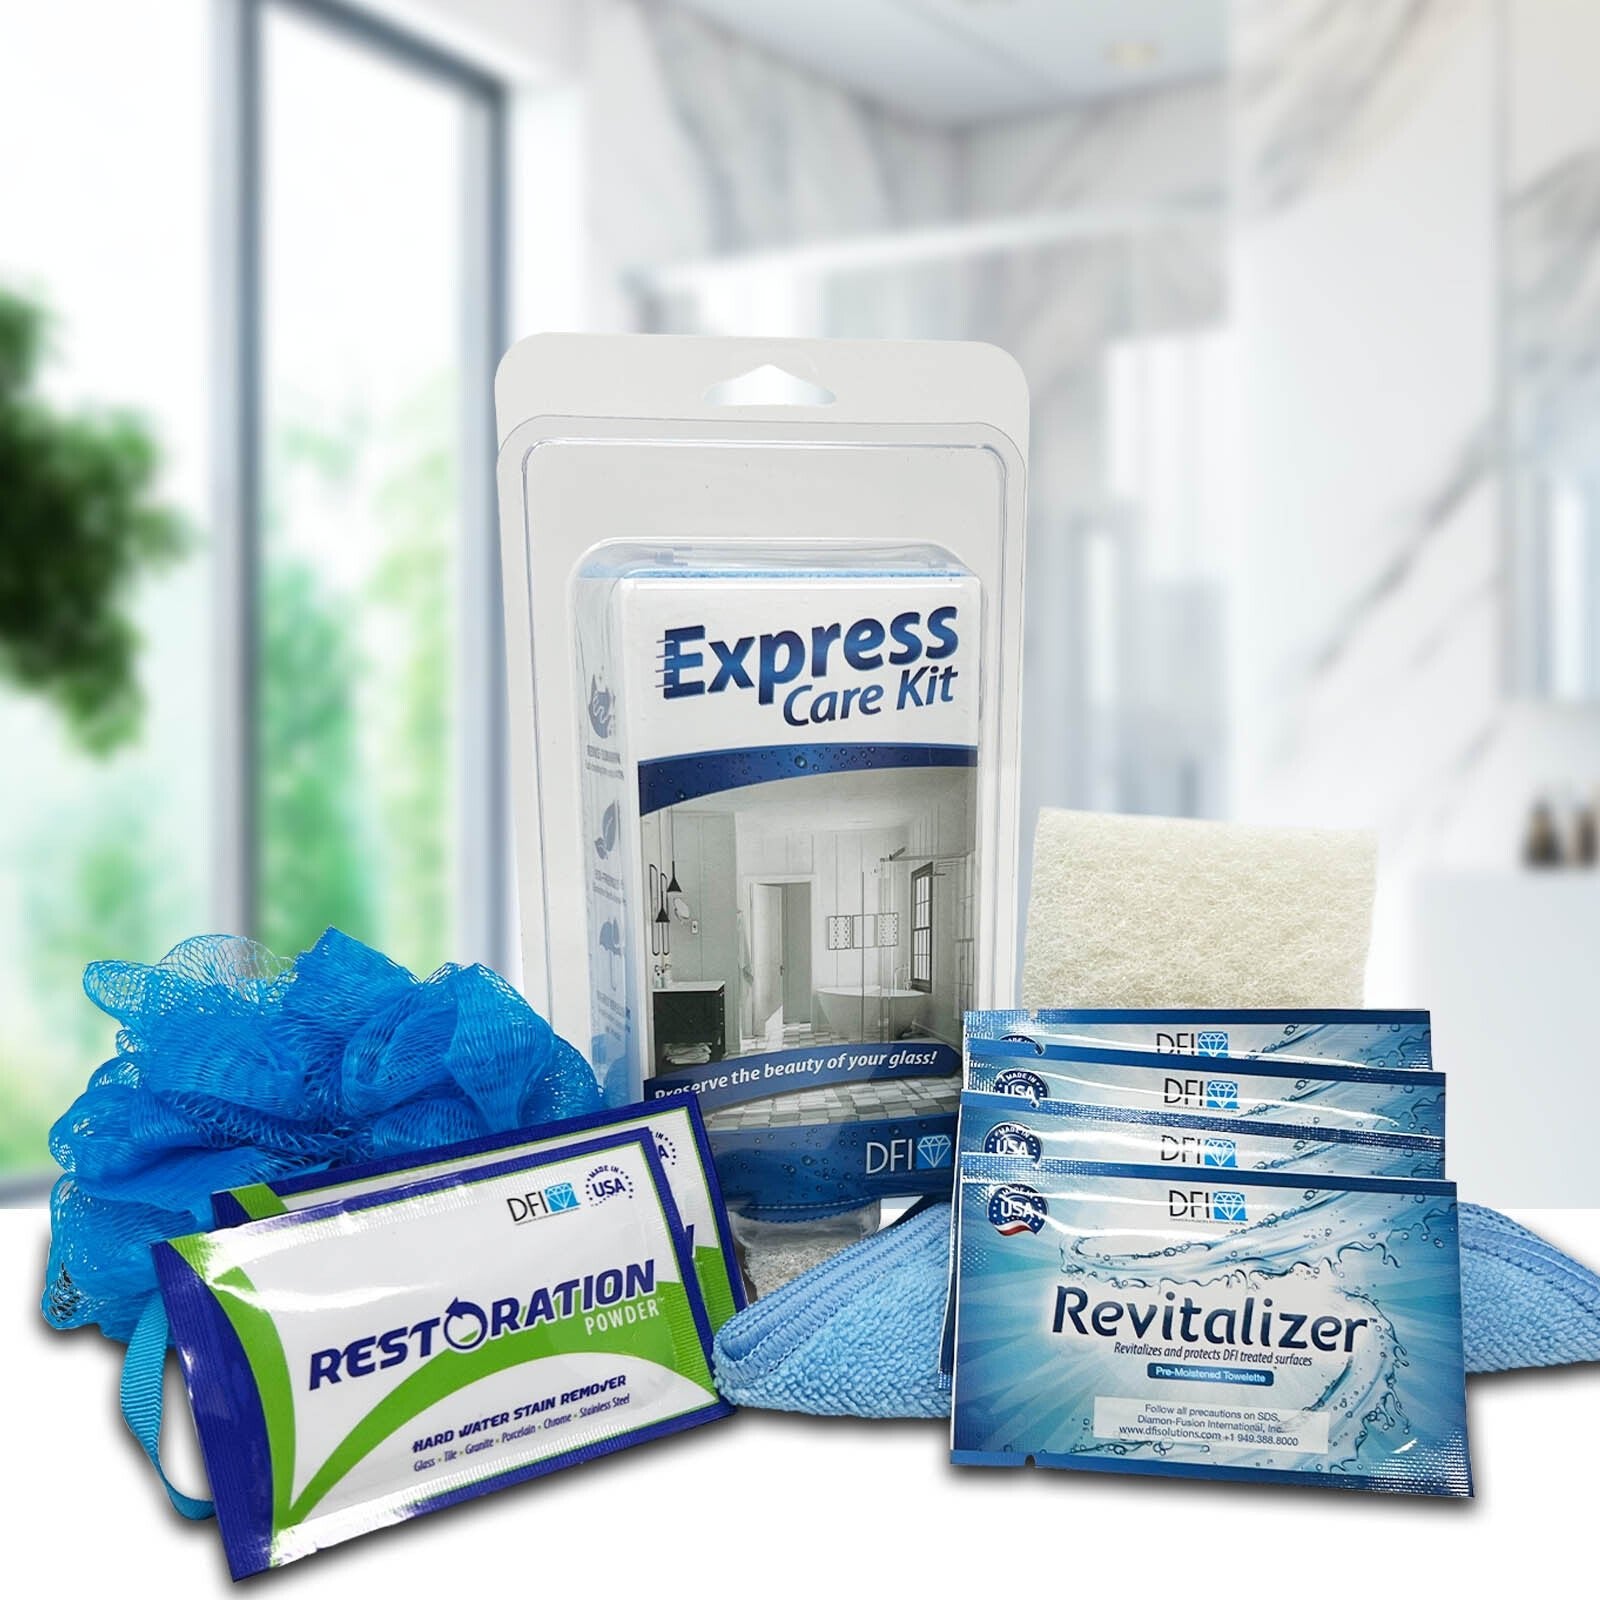 Express Care Kit with Products Outside of Packaging on Blurred Bathroom Background